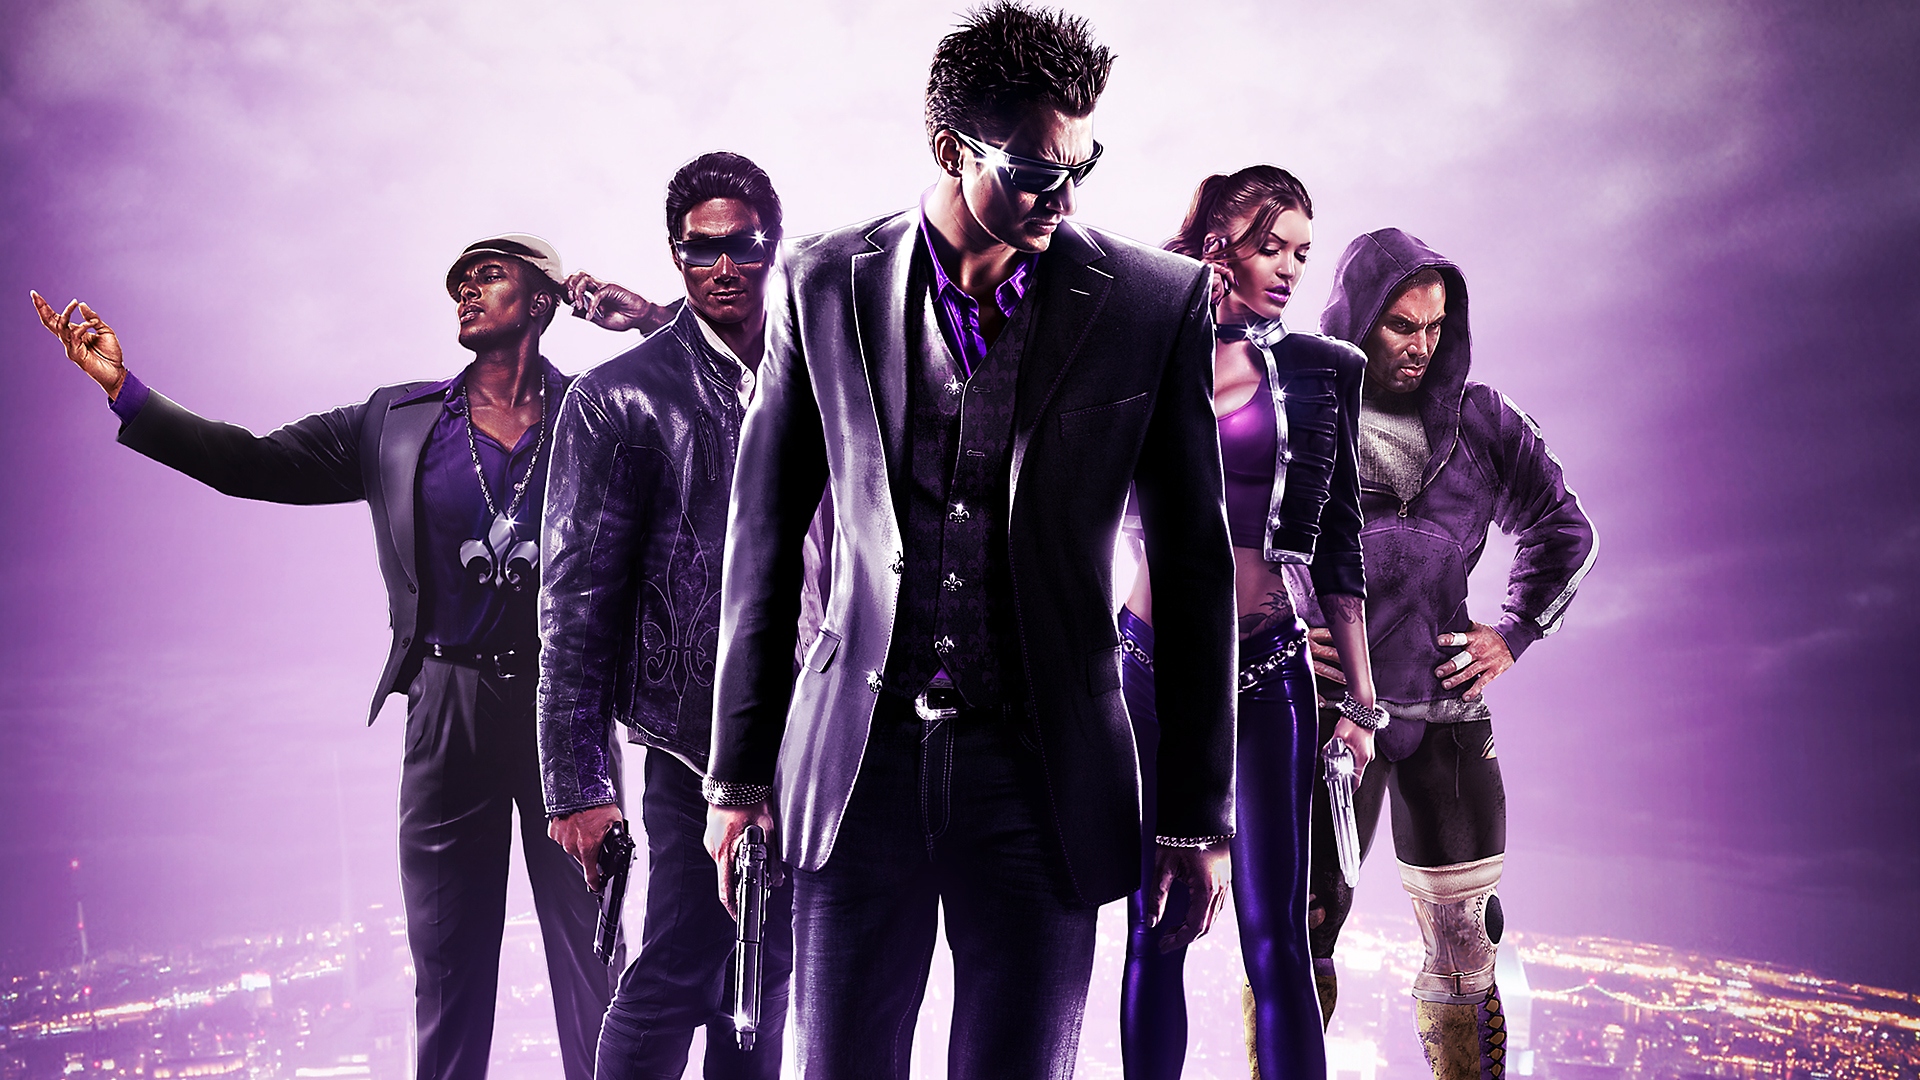 Saints Row The Third Remastered - Launch Trailer | PS5